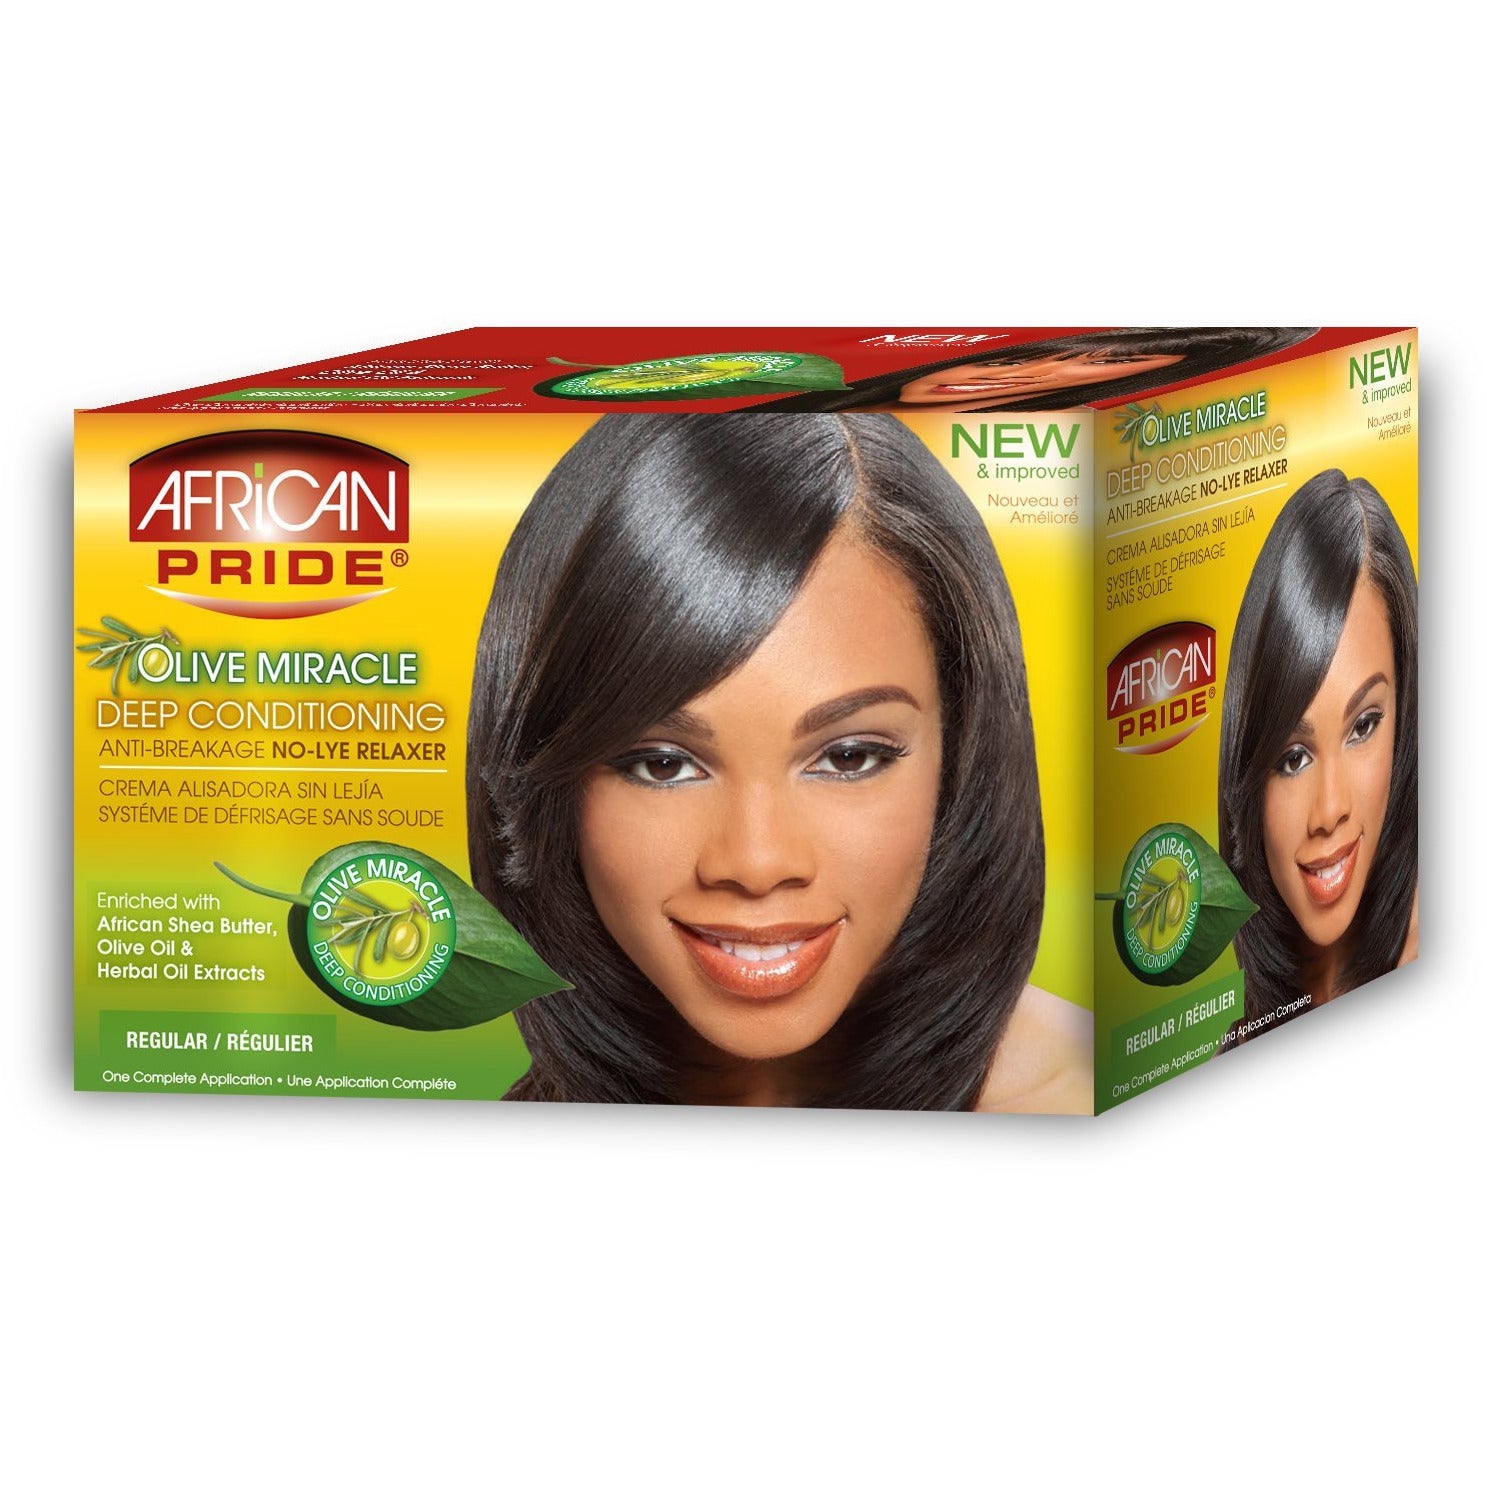 4th Ave Market: African Pride Deep Conditioning No Lye Regular Relaxer System